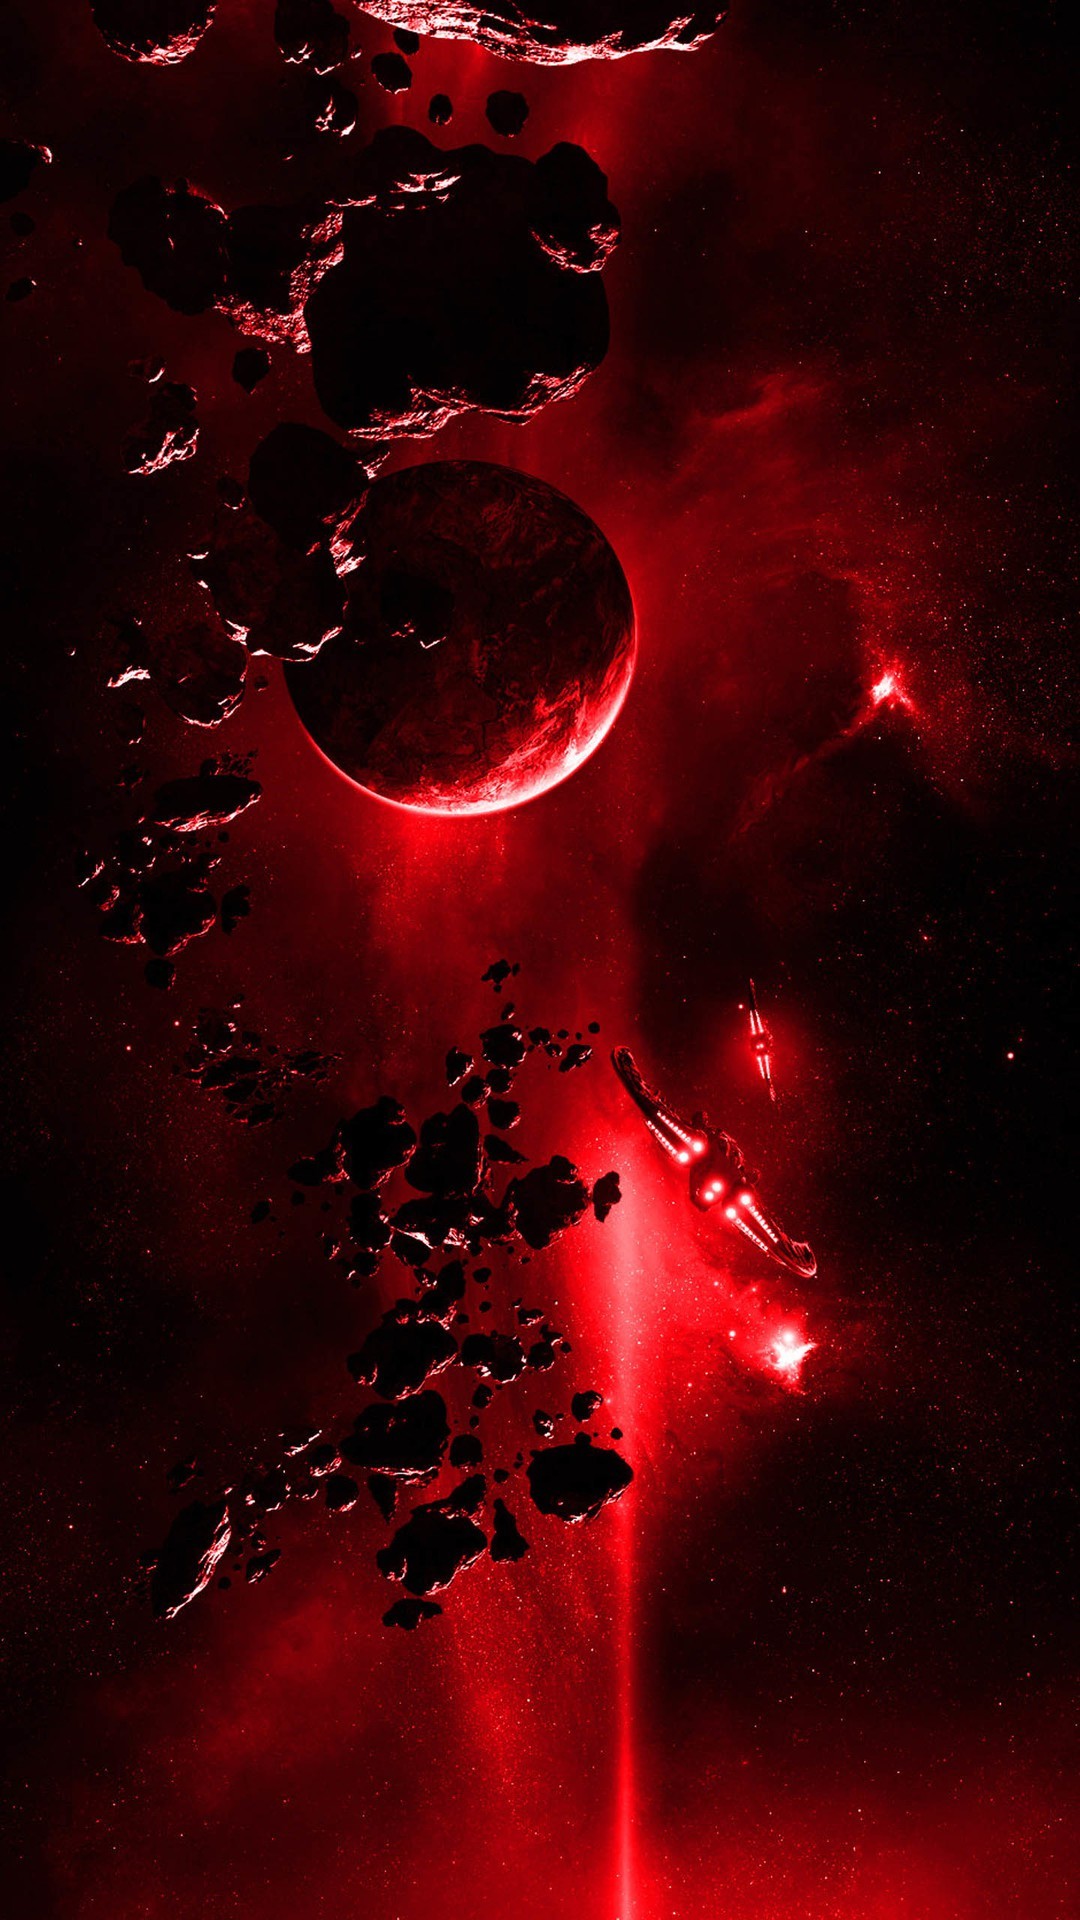 Red Light From Space IPhone 6 Wallpaper Data Src Red Wallpaper For IPhone